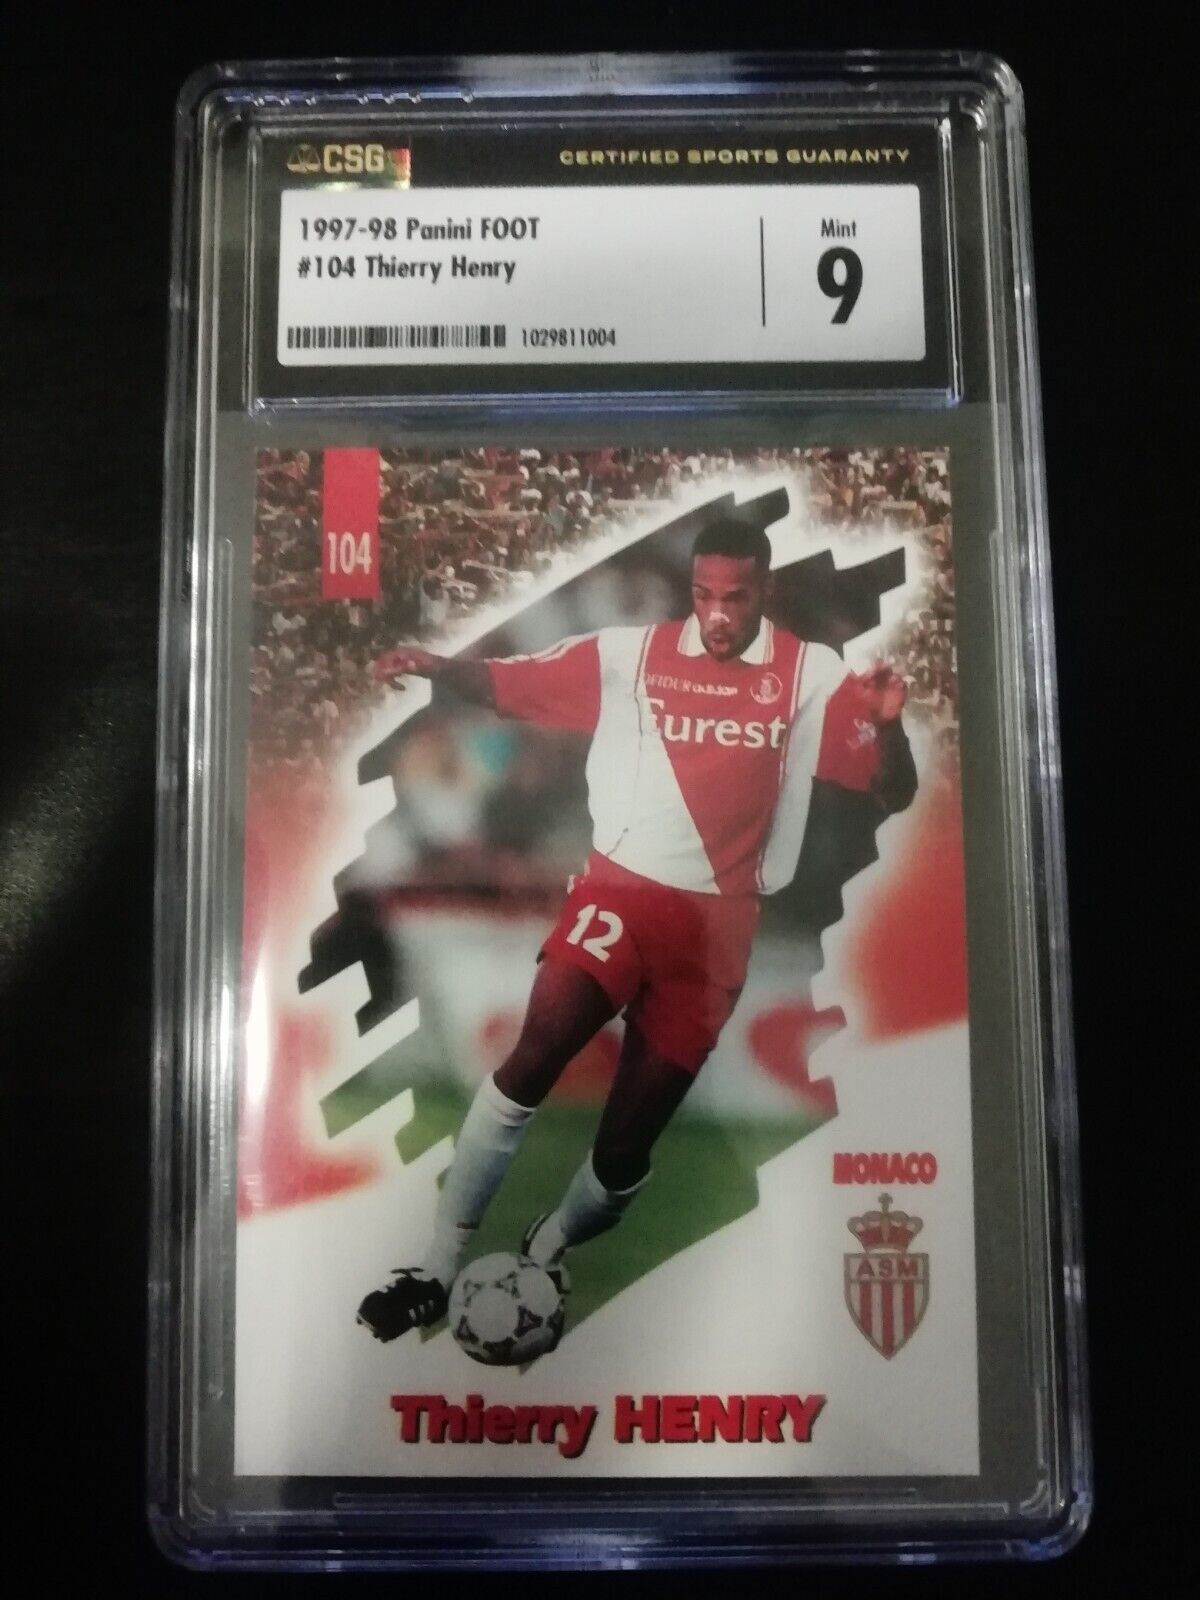 1997 Thierry Henry Panini Foot Rookie Card RC CSG 9